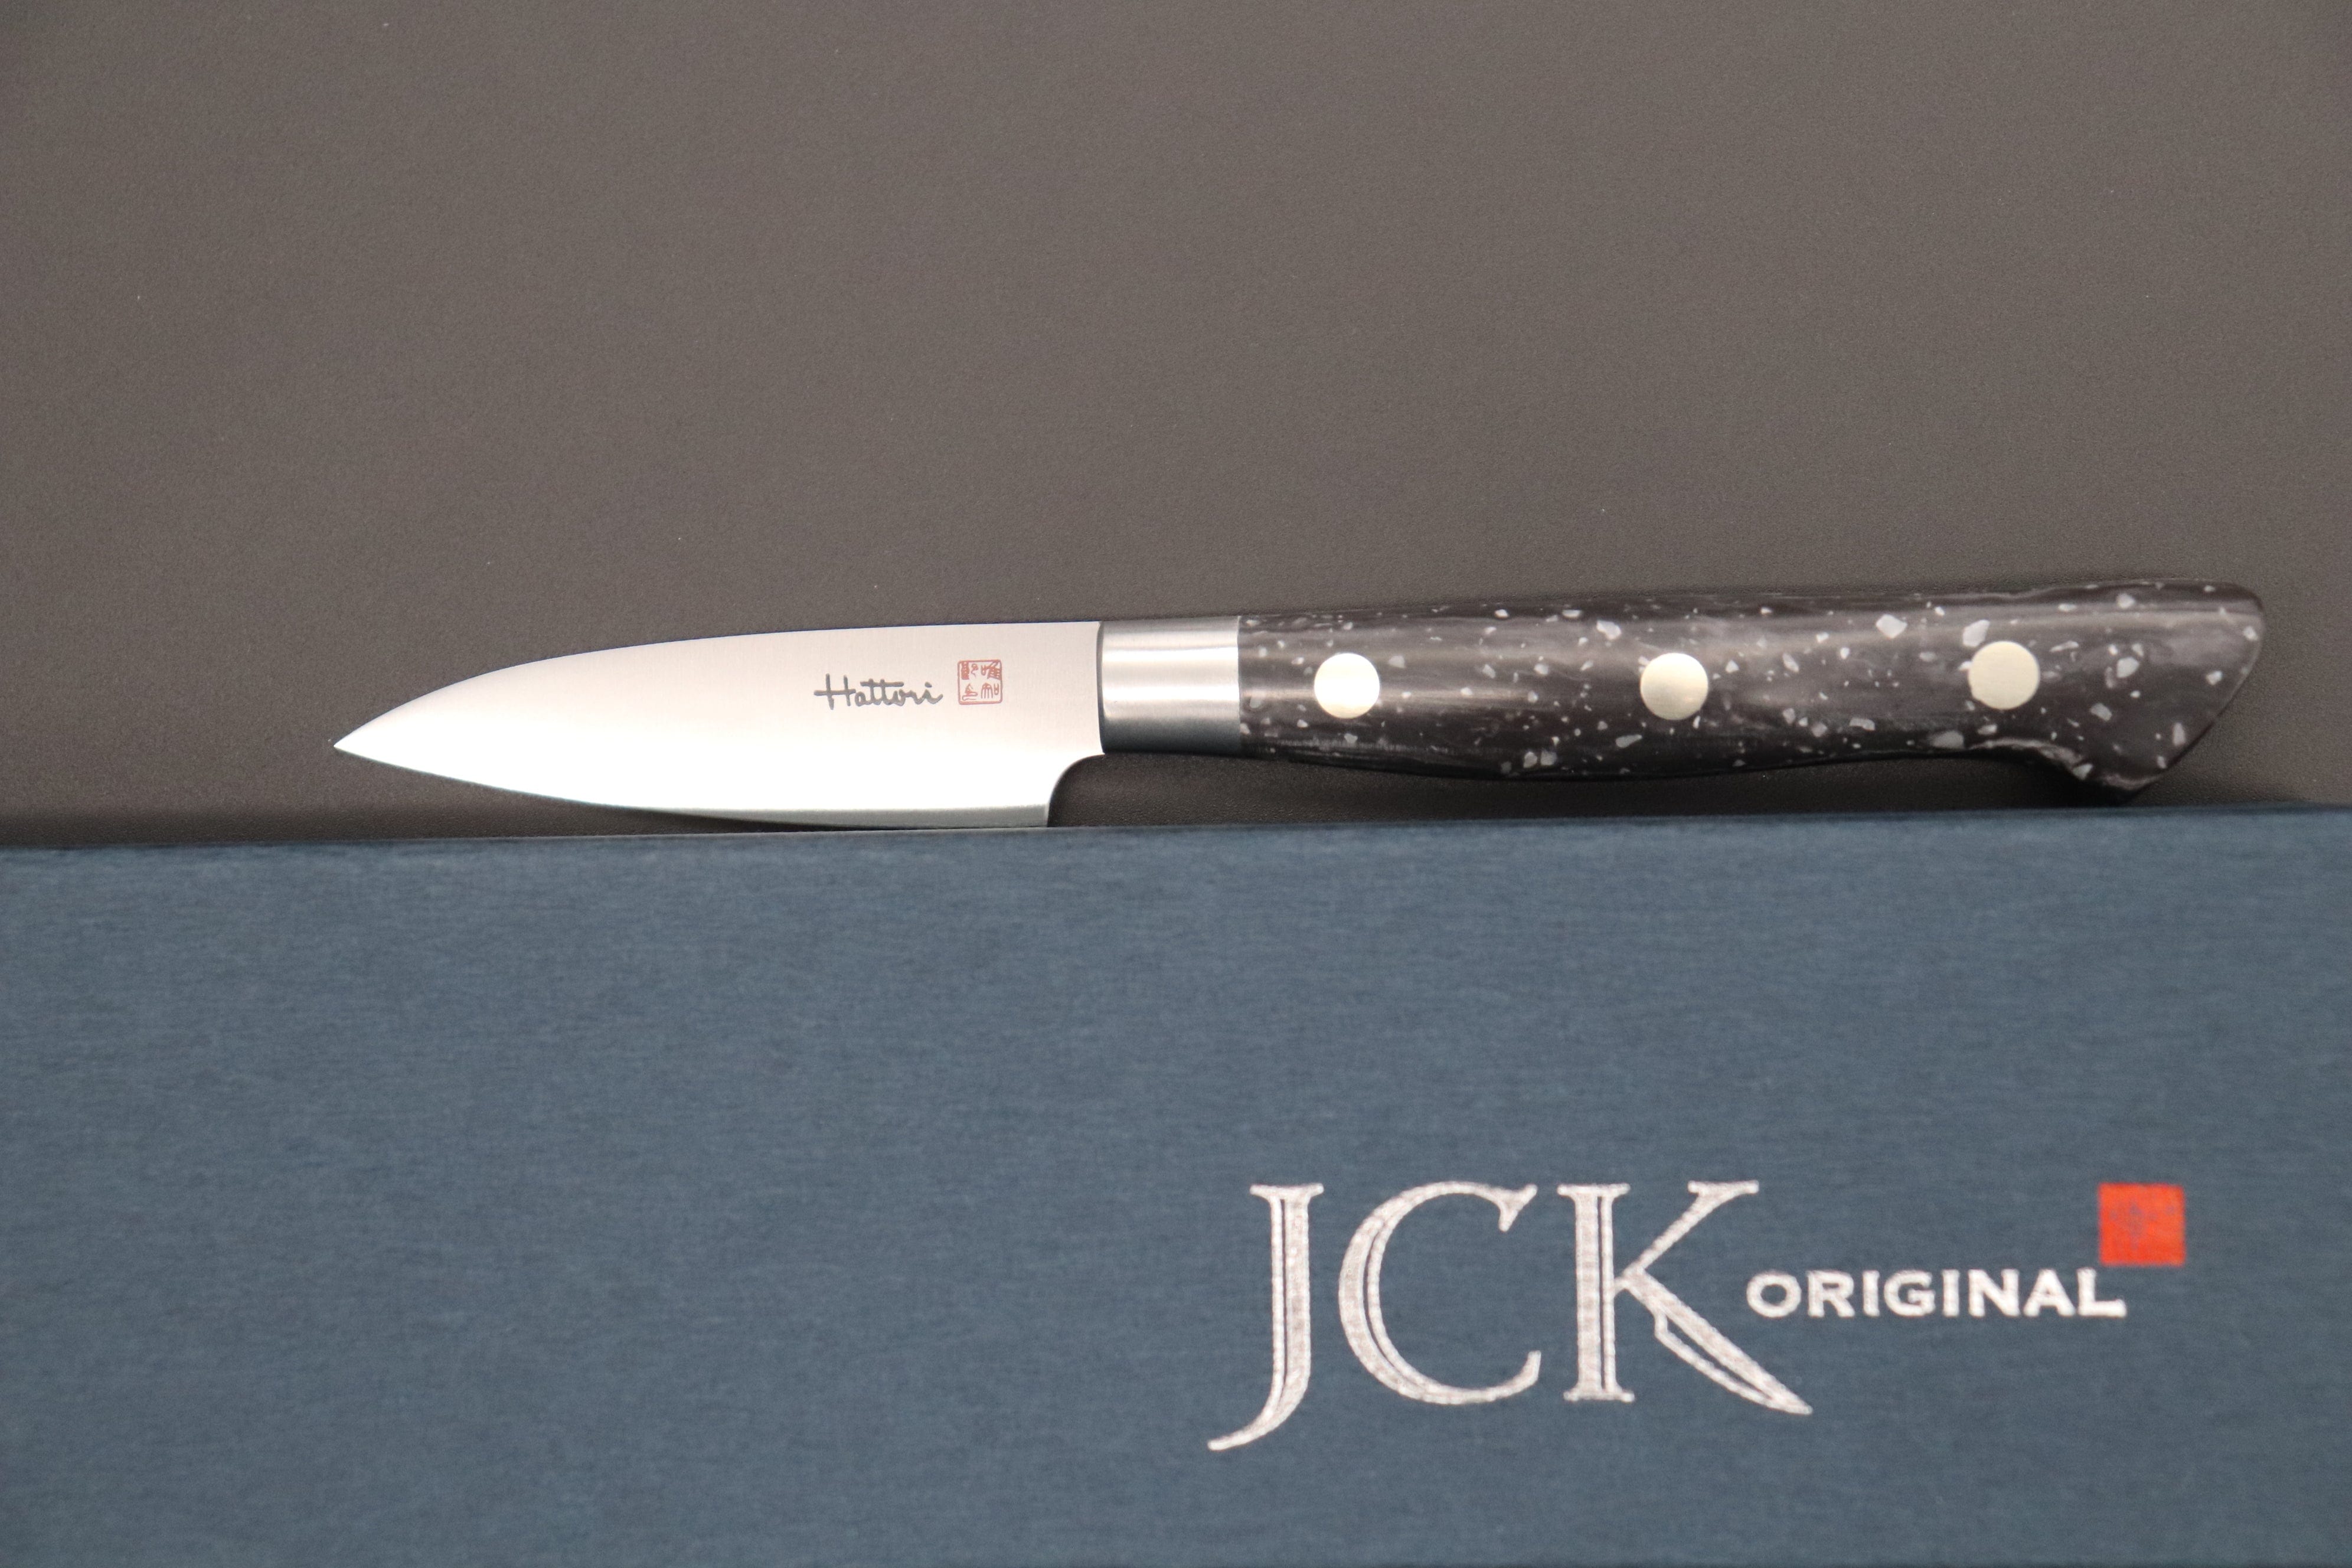 https://japanesechefsknife.com/cdn/shop/files/hattori-paring-hattori-forums-fh-series-limited-edition-snow-in-the-dark-fh-1nd-parer-70mm-2-7-inch-dupont-corian-handle-41608847425819.jpg?v=1685941065